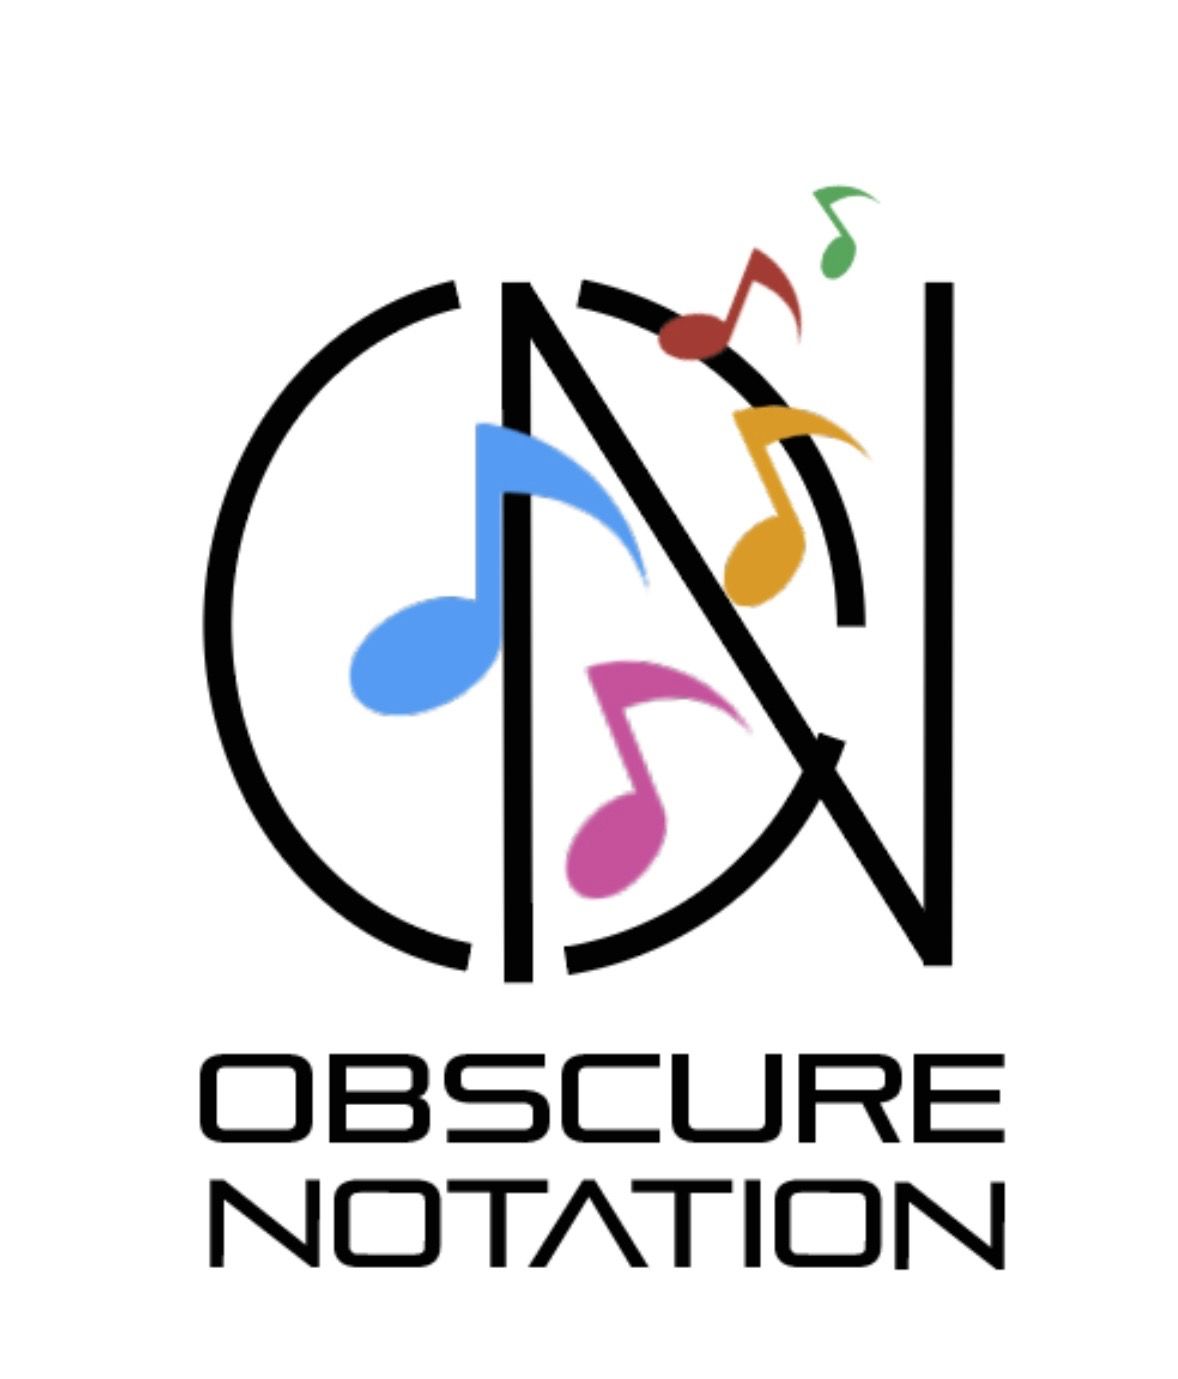 Obscure Notation